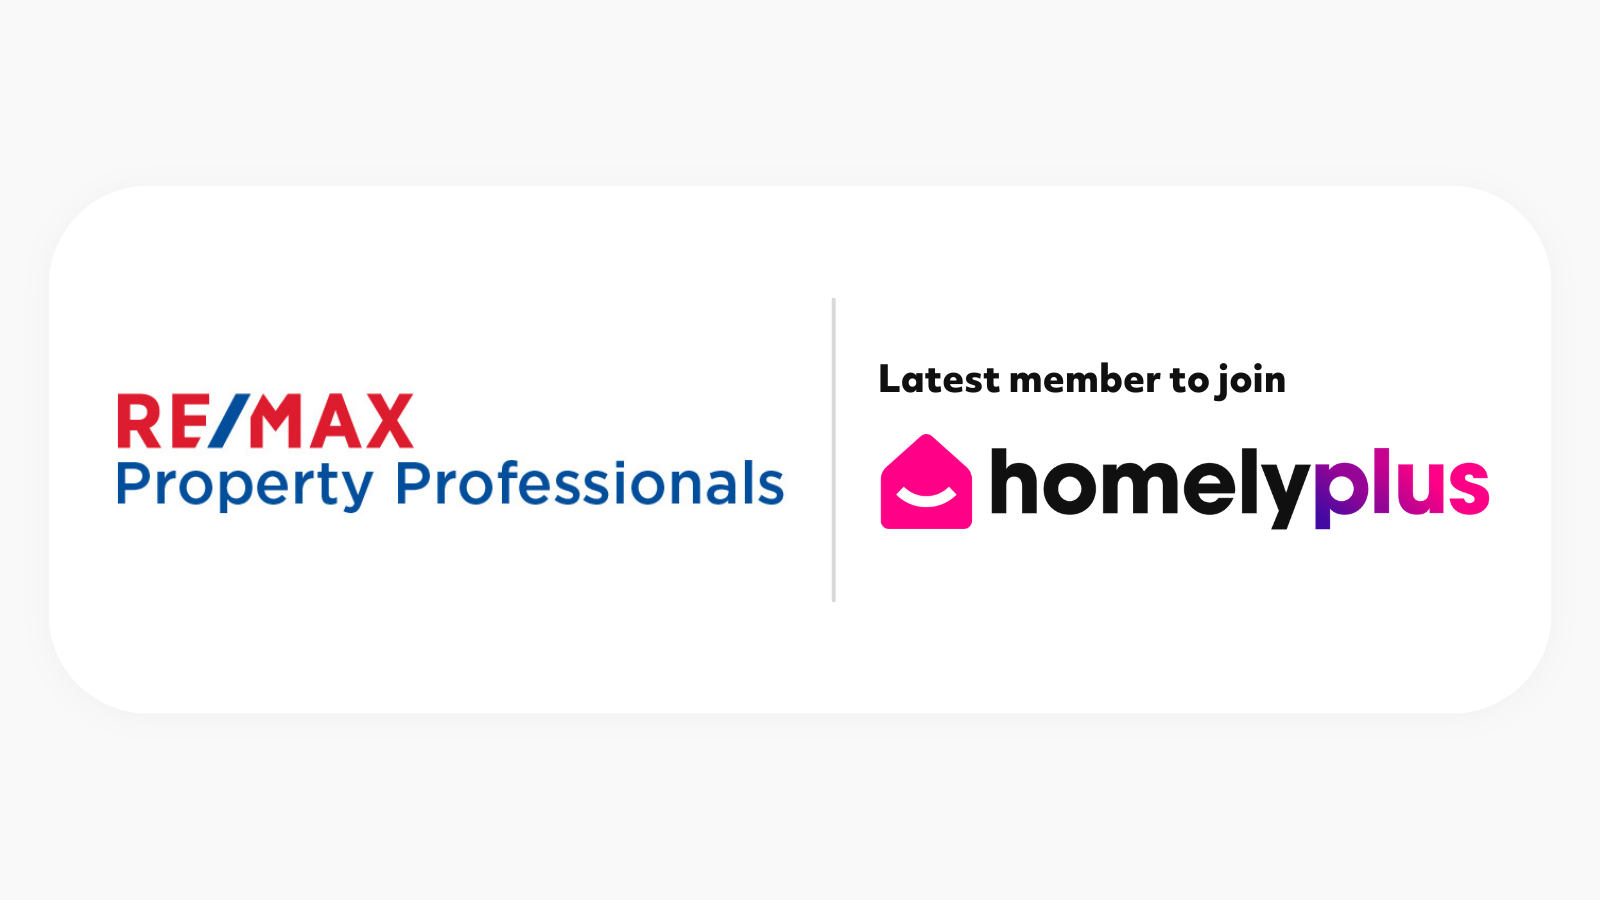 remax property professionals and homely plus